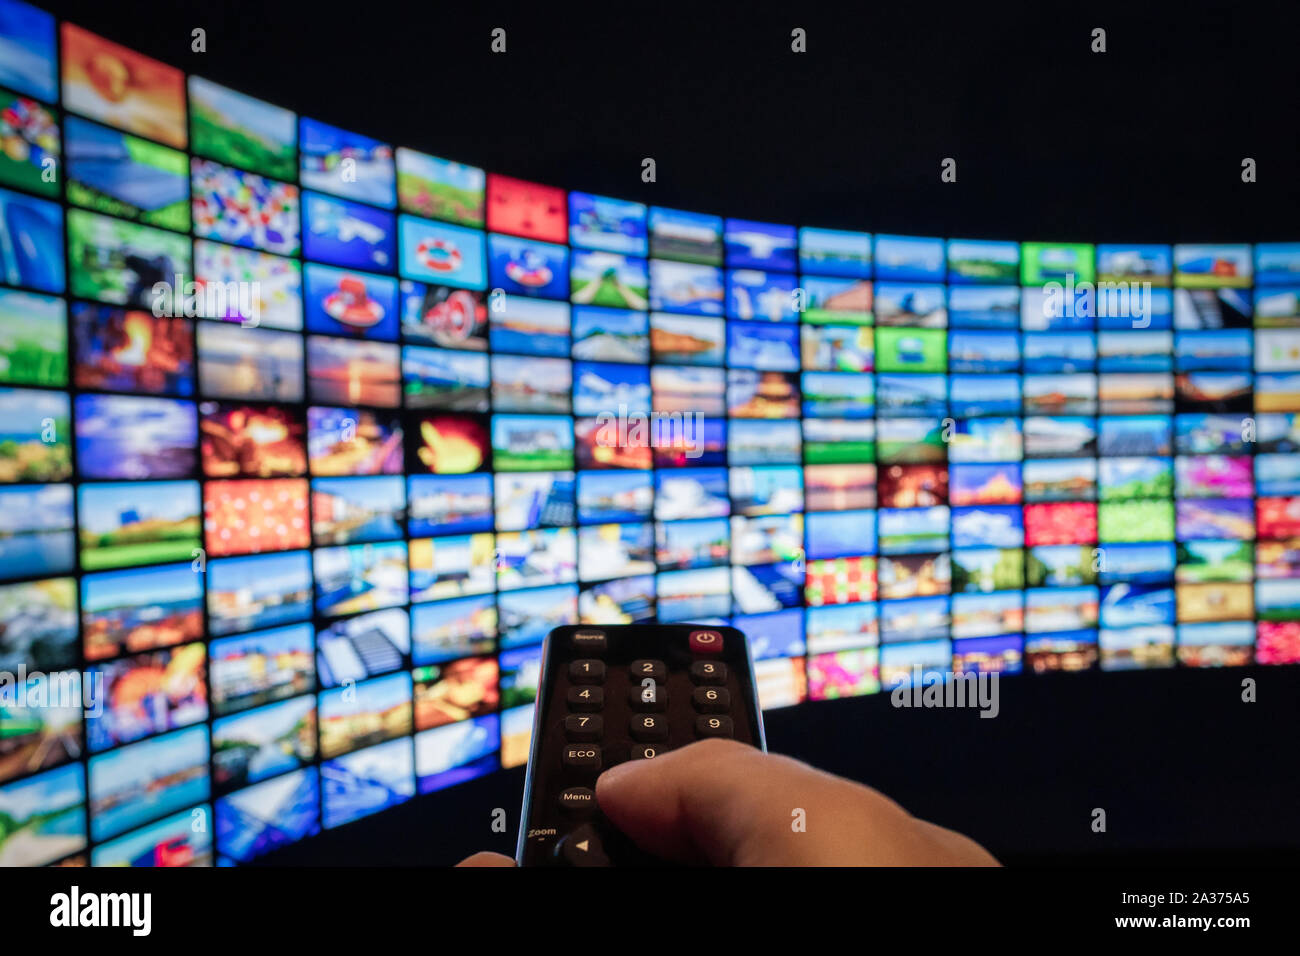 Multimedia Television video streaming, Media TV on demand, web banner background Stock Photo